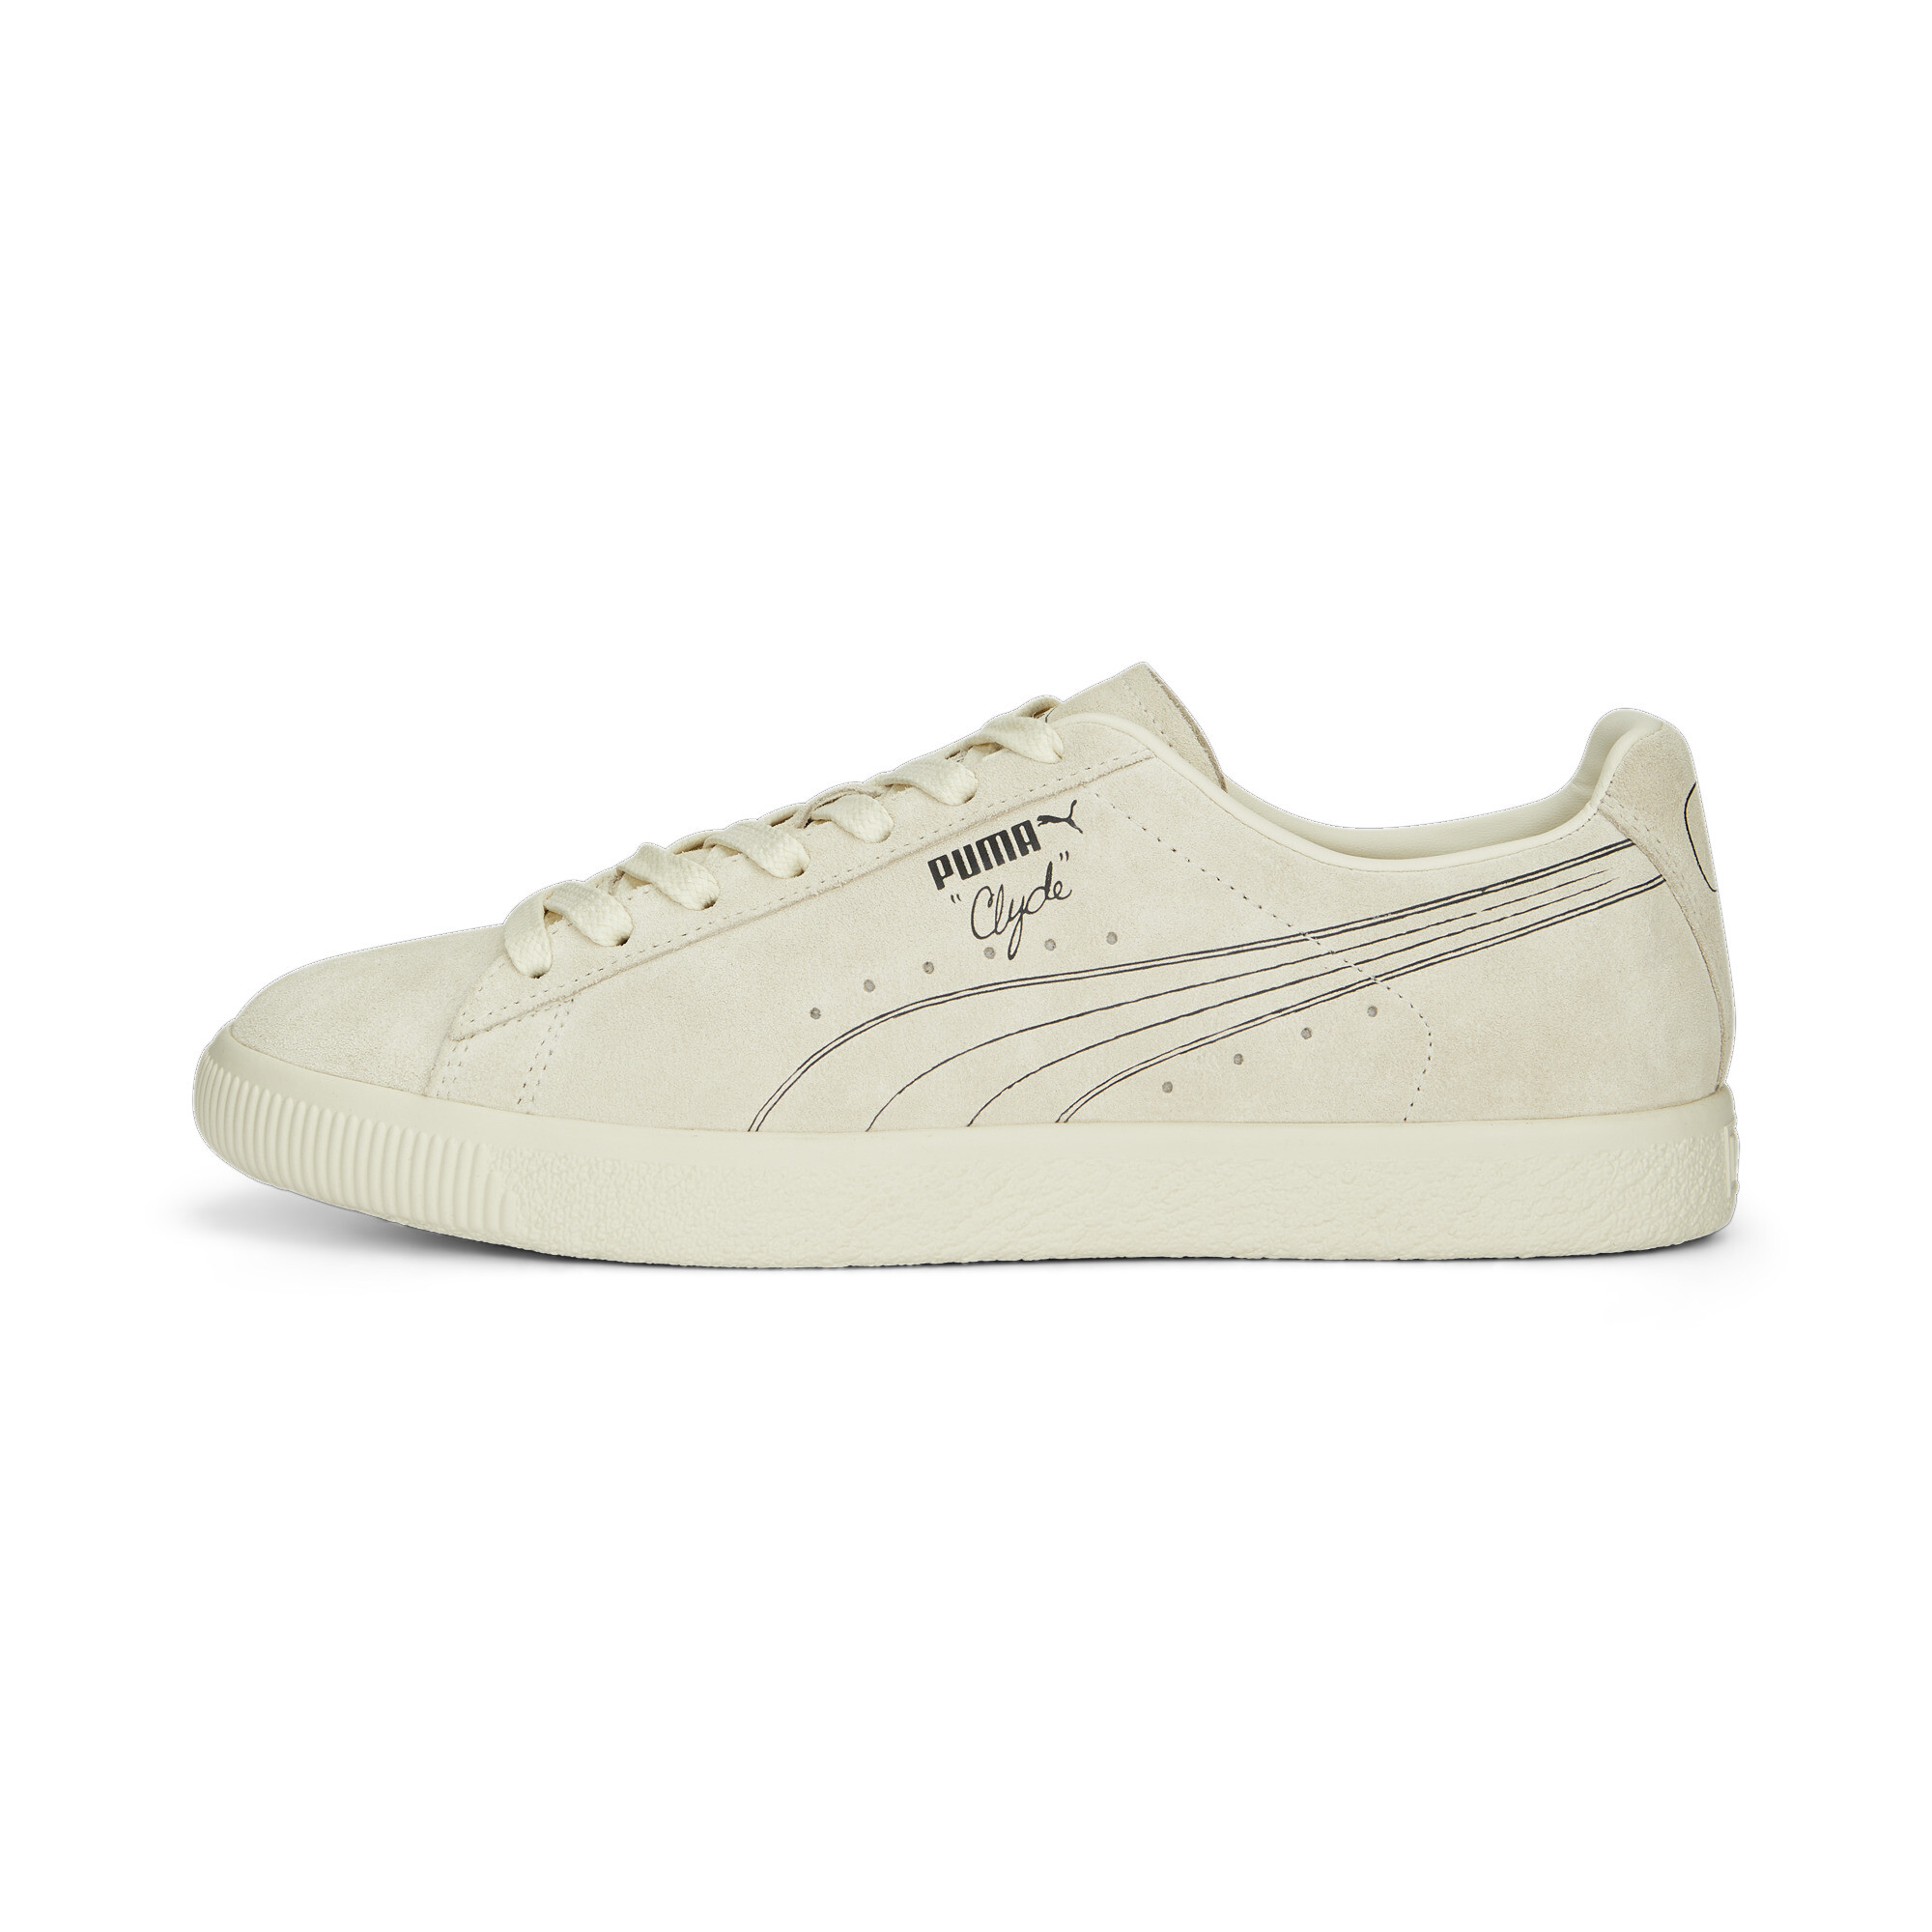 Puma Clyde No.1 Sneakers, White, Size 41, Shoes